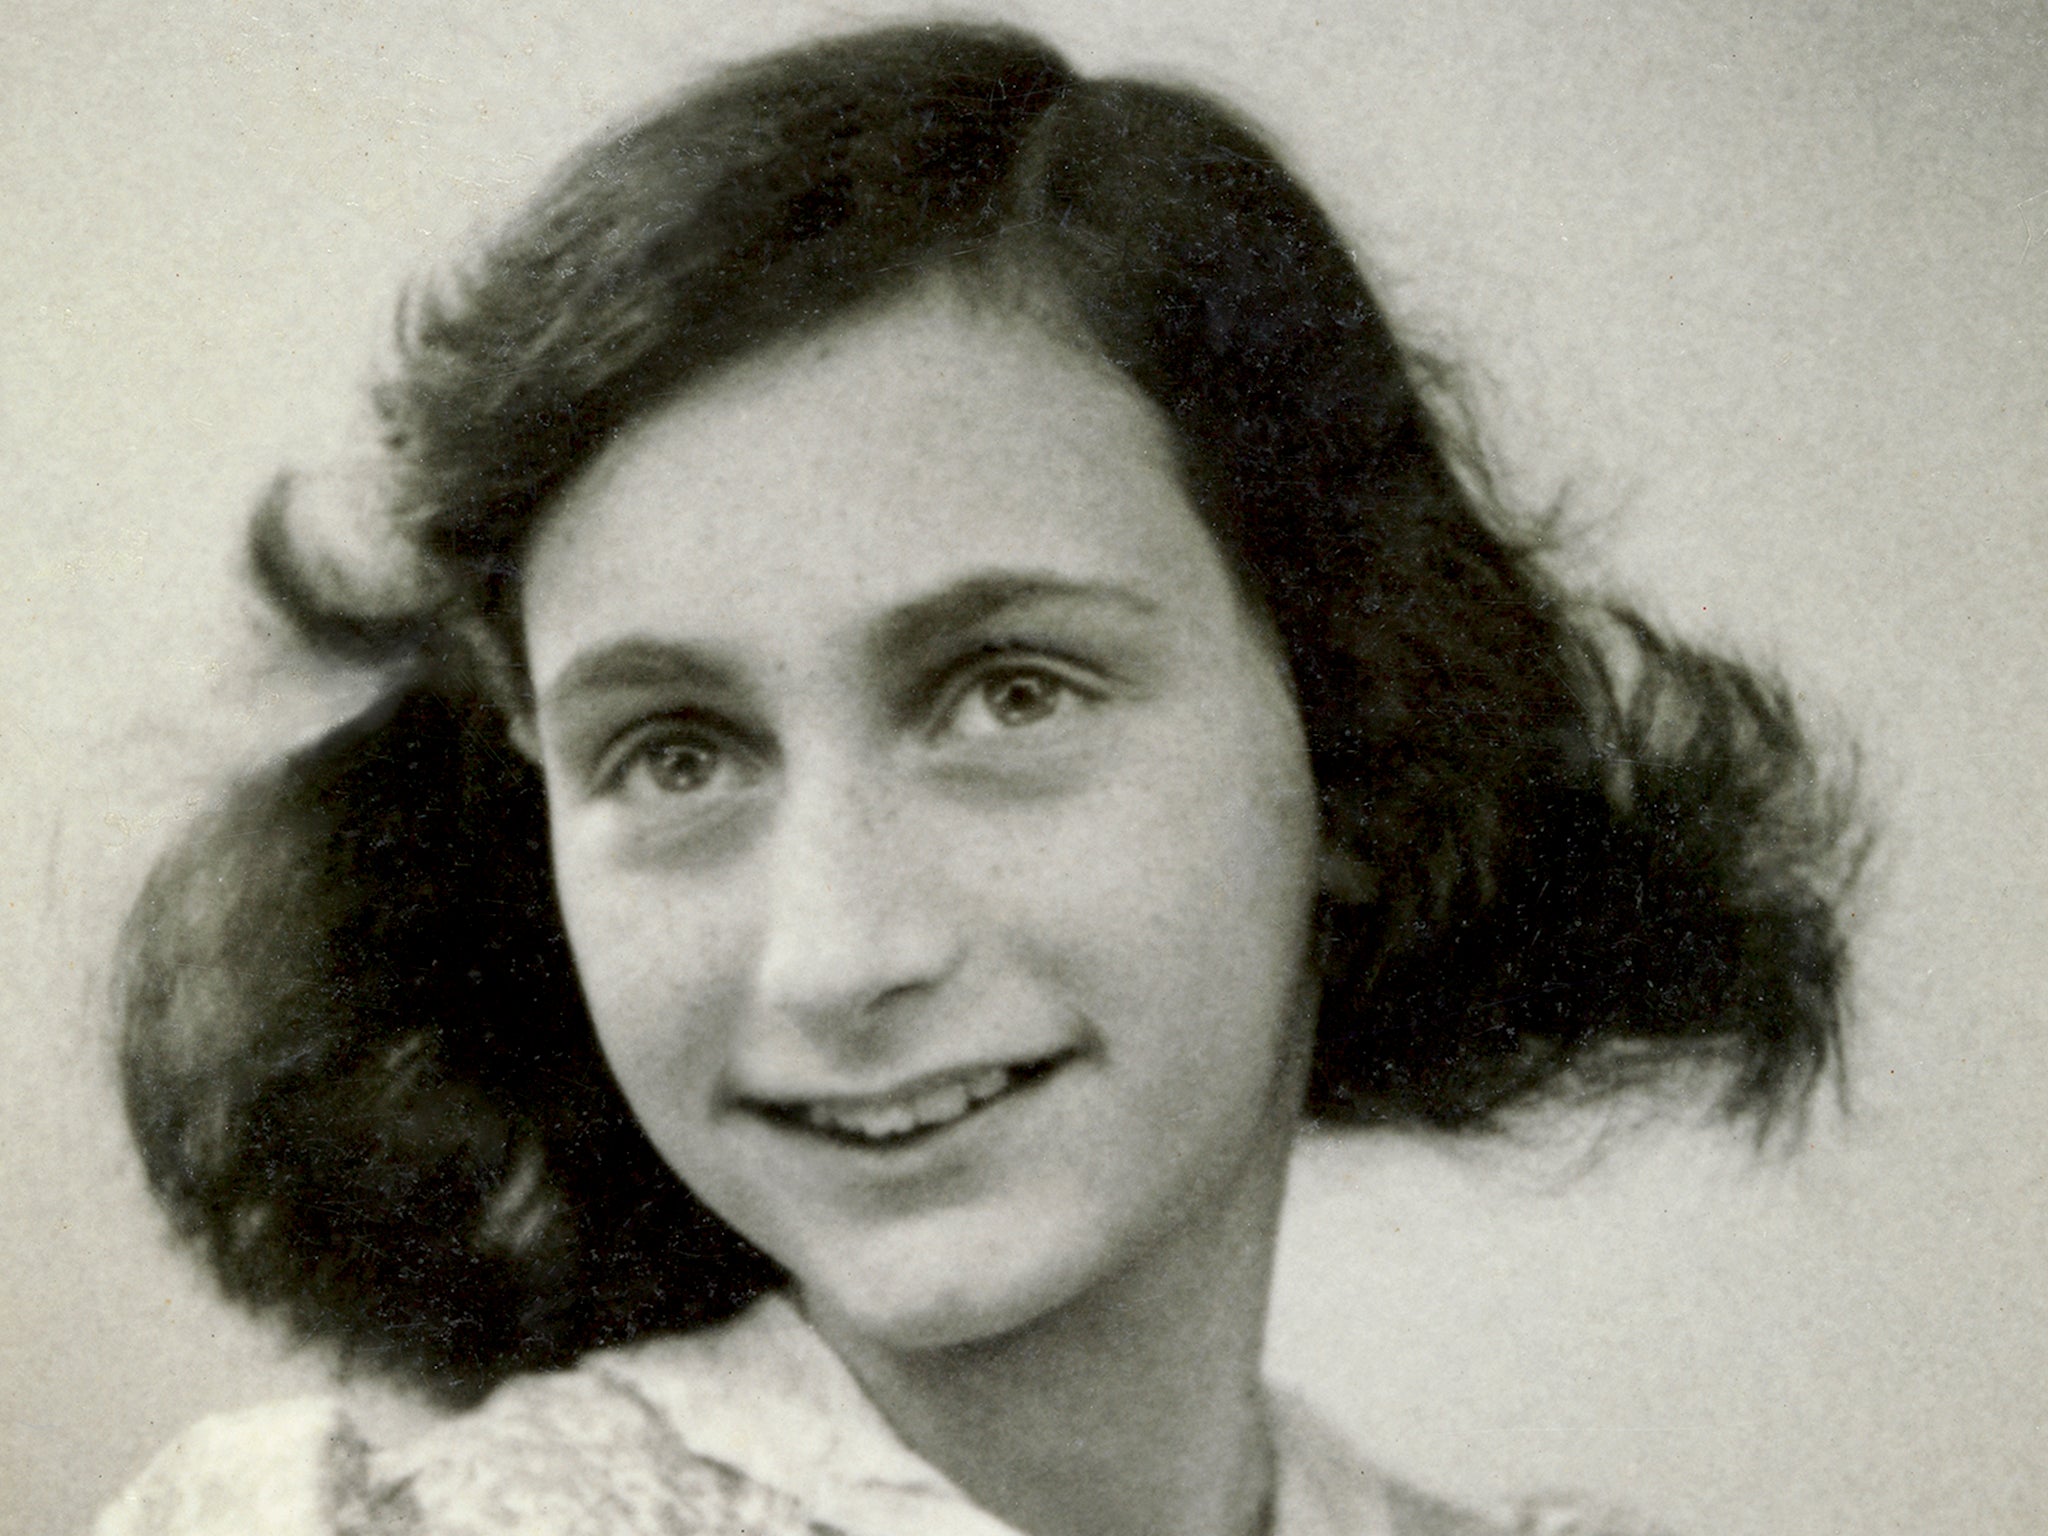 Anne Frank’s diary of her time hiding from the Nazis is a source of inspiration for David Berkowitz, he says